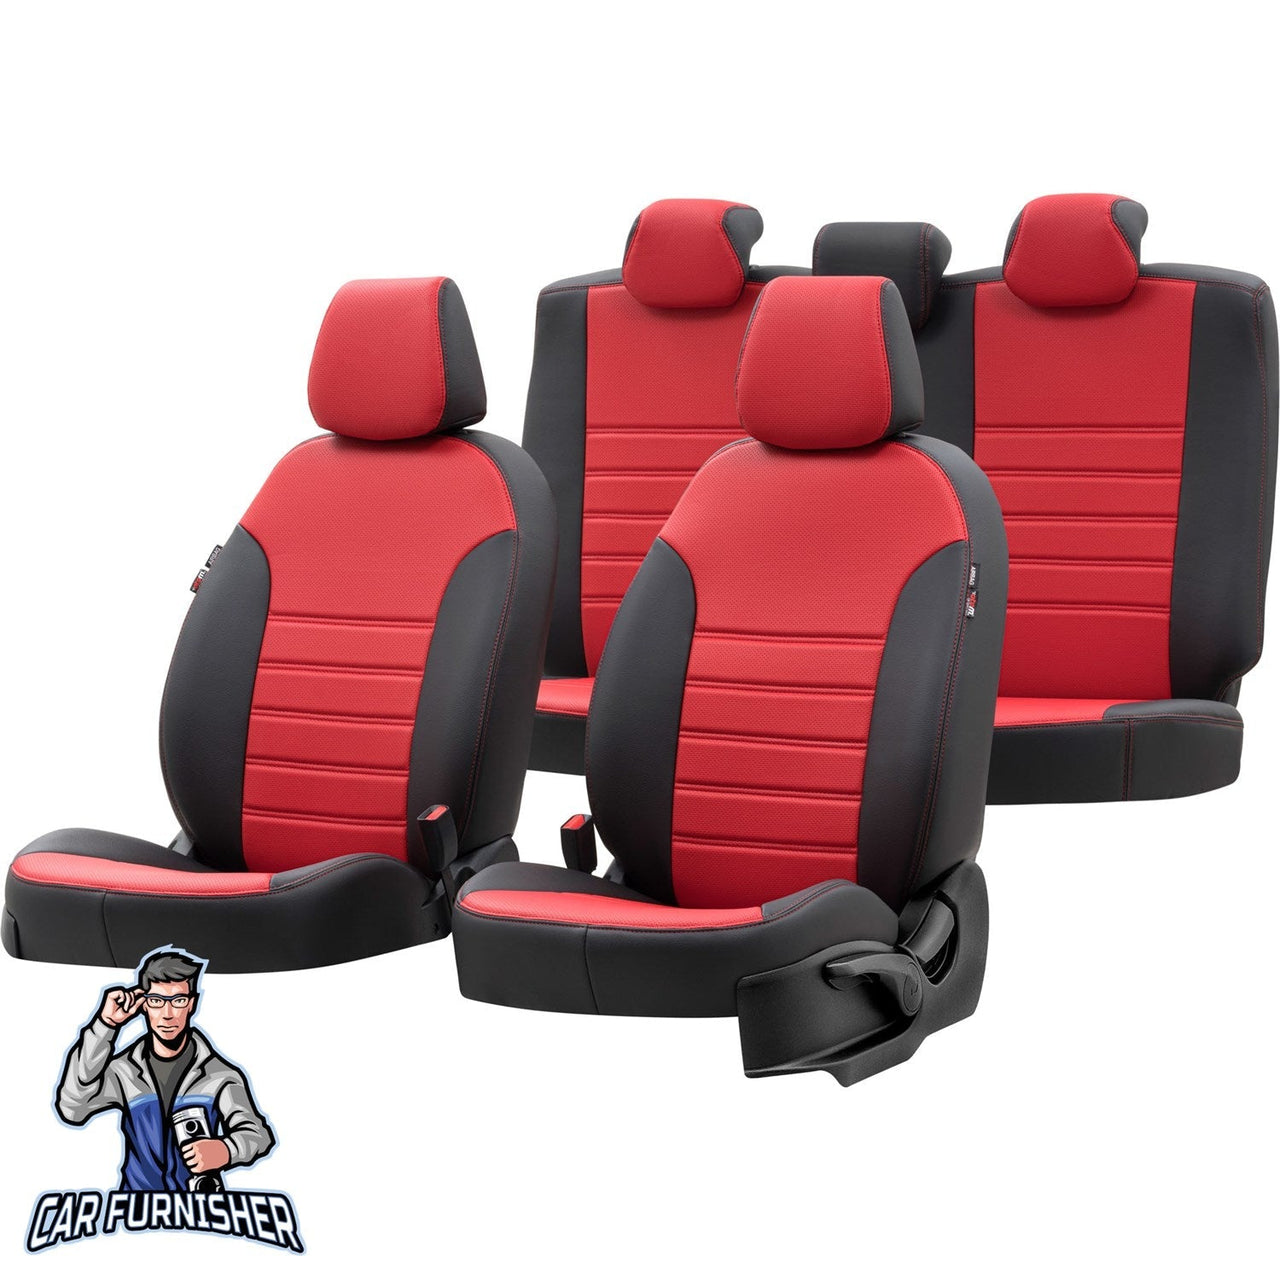 Skoda Octavia Seat Covers New York Leather Design Red Leather